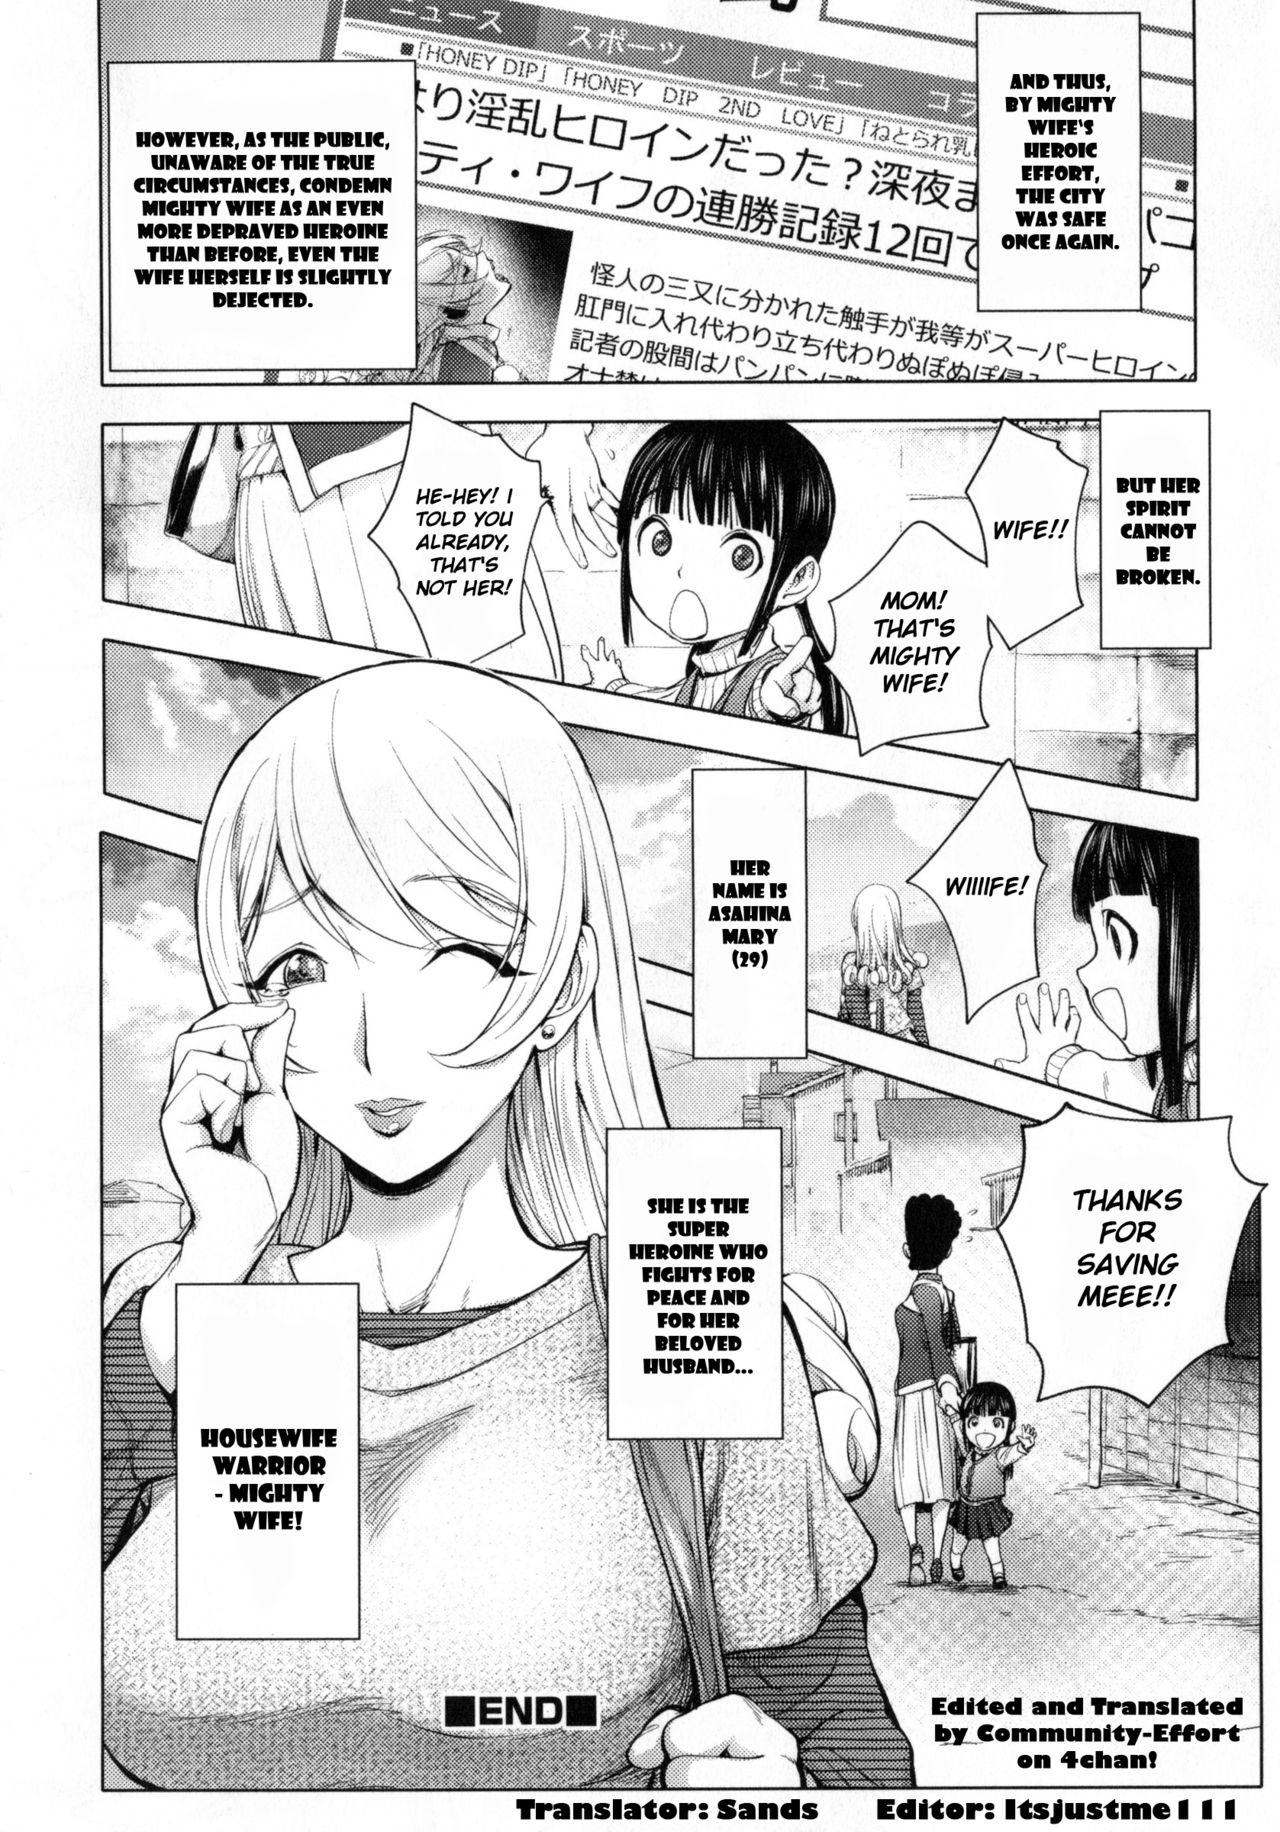 Deflowered Aisai Senshi Mighty Wife 8th | Beloved Housewife Warrior Mighty Wife 8th Granny - Page 19